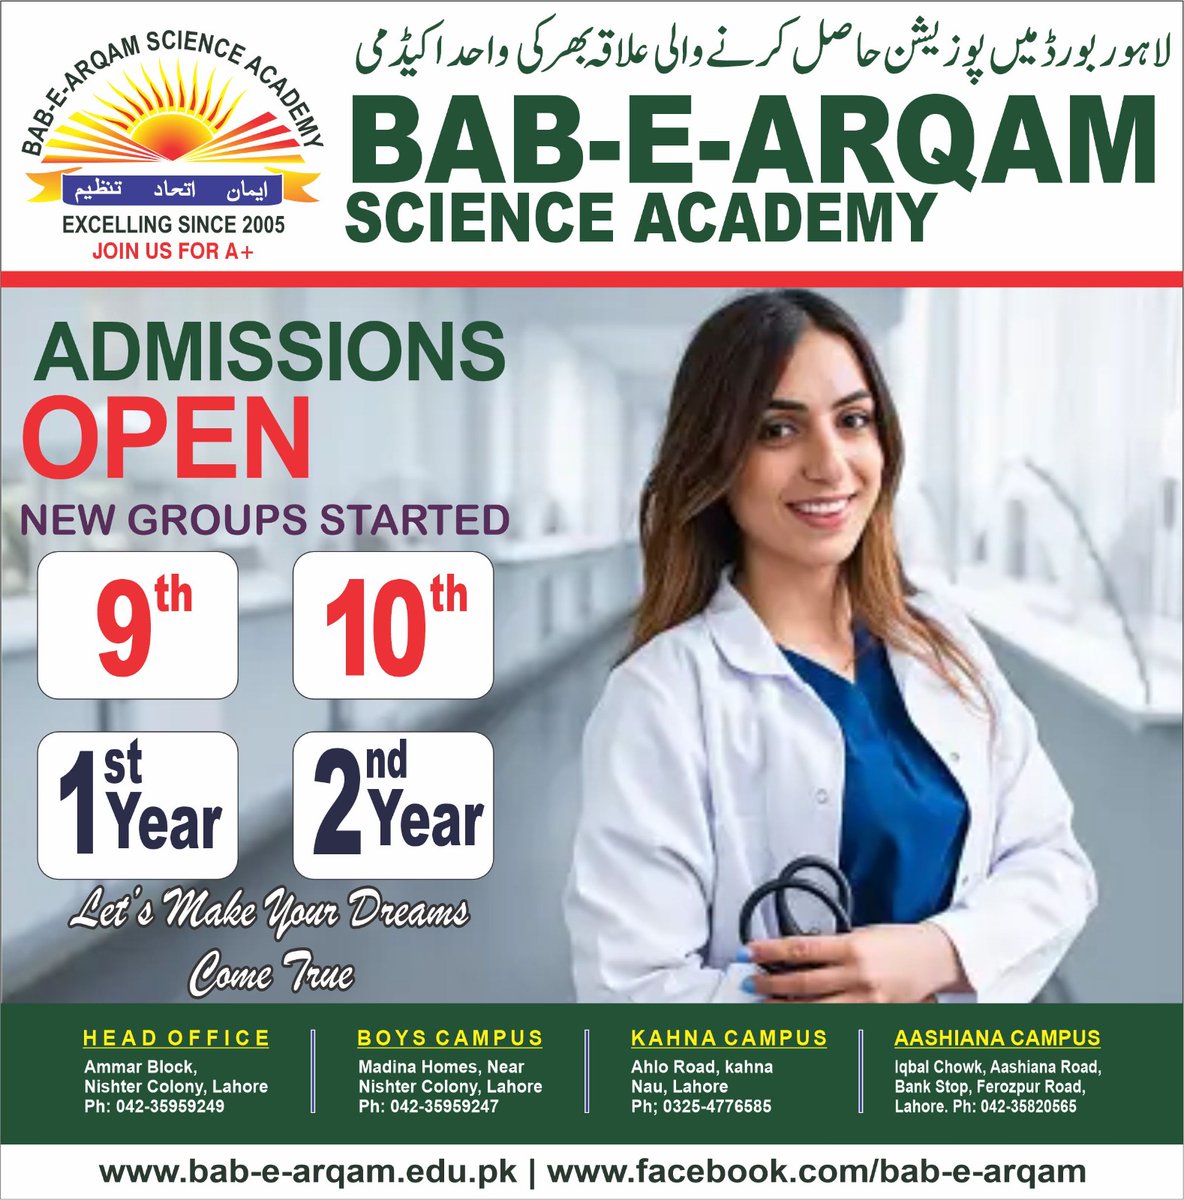 #AdmissionOpen #EnrollmentOpen #DiscoverYourPassion #BrightMinds #ExceptionalEducation 
#BAB_E_ARQAM
#babearqam
#bab_e_arqam_group_of_schools
#Babearqamgroupofschools
#babearqam_academy
#bab_e_arqam_science_academy
#babearqamscienceacademy
#bab_e_arqam_group_of_institutions